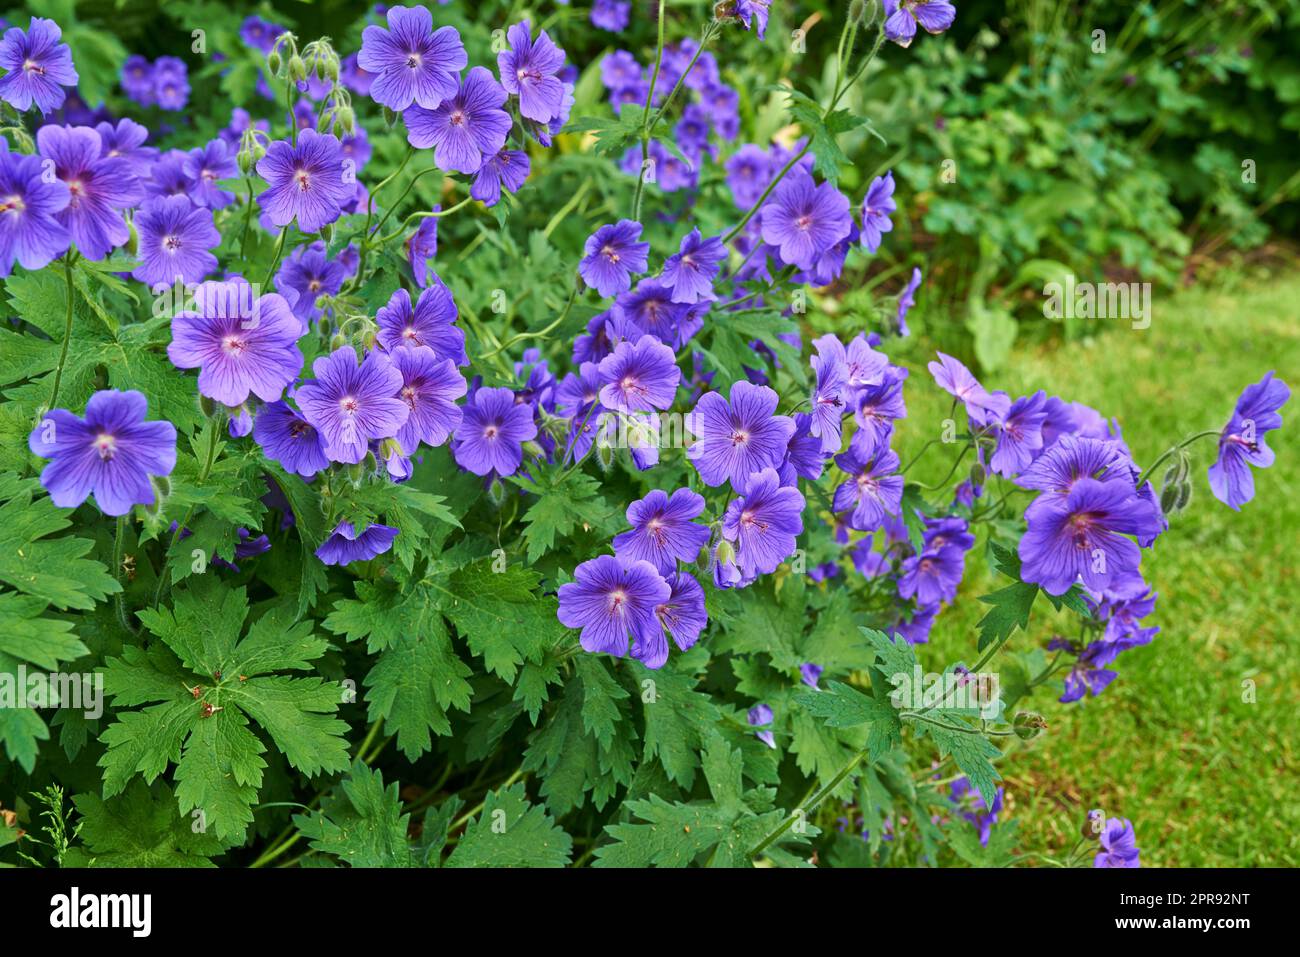 Cluster of beautiful purple blue flowers common name cranesbill of Geraniaceae family, growing in a meadow. Geranium Johnson Blue perennial blooms with blue petals in vibrant natural green garden Stock Photo